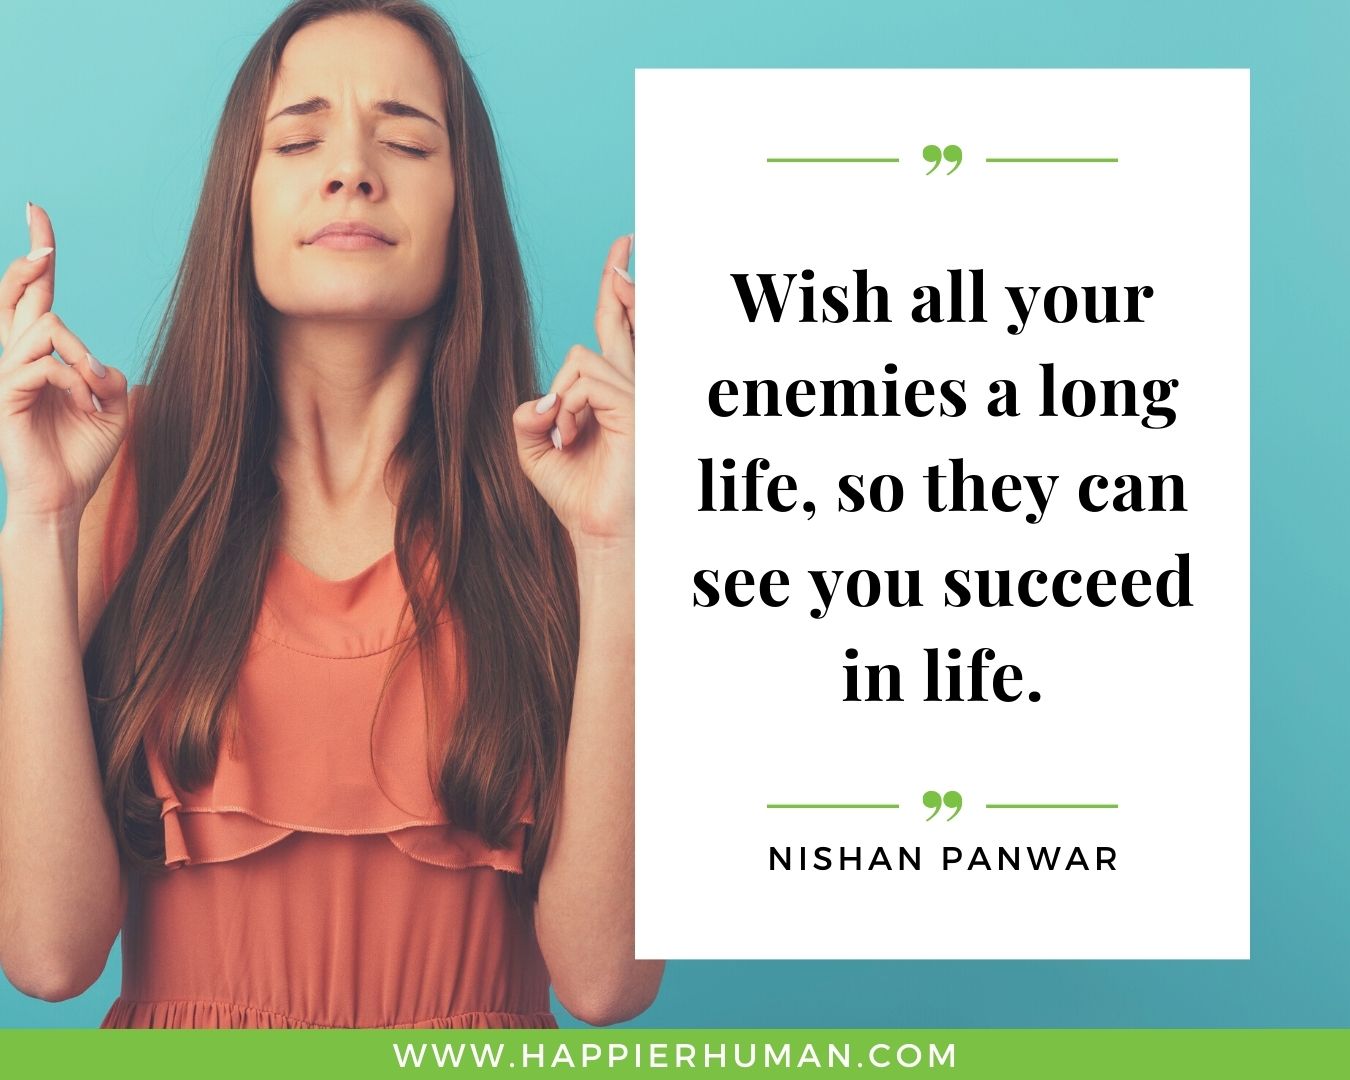 Haters Quotes - "Wish all your enemies a long life, so they can see you succeed in life." - Nishan Panwar